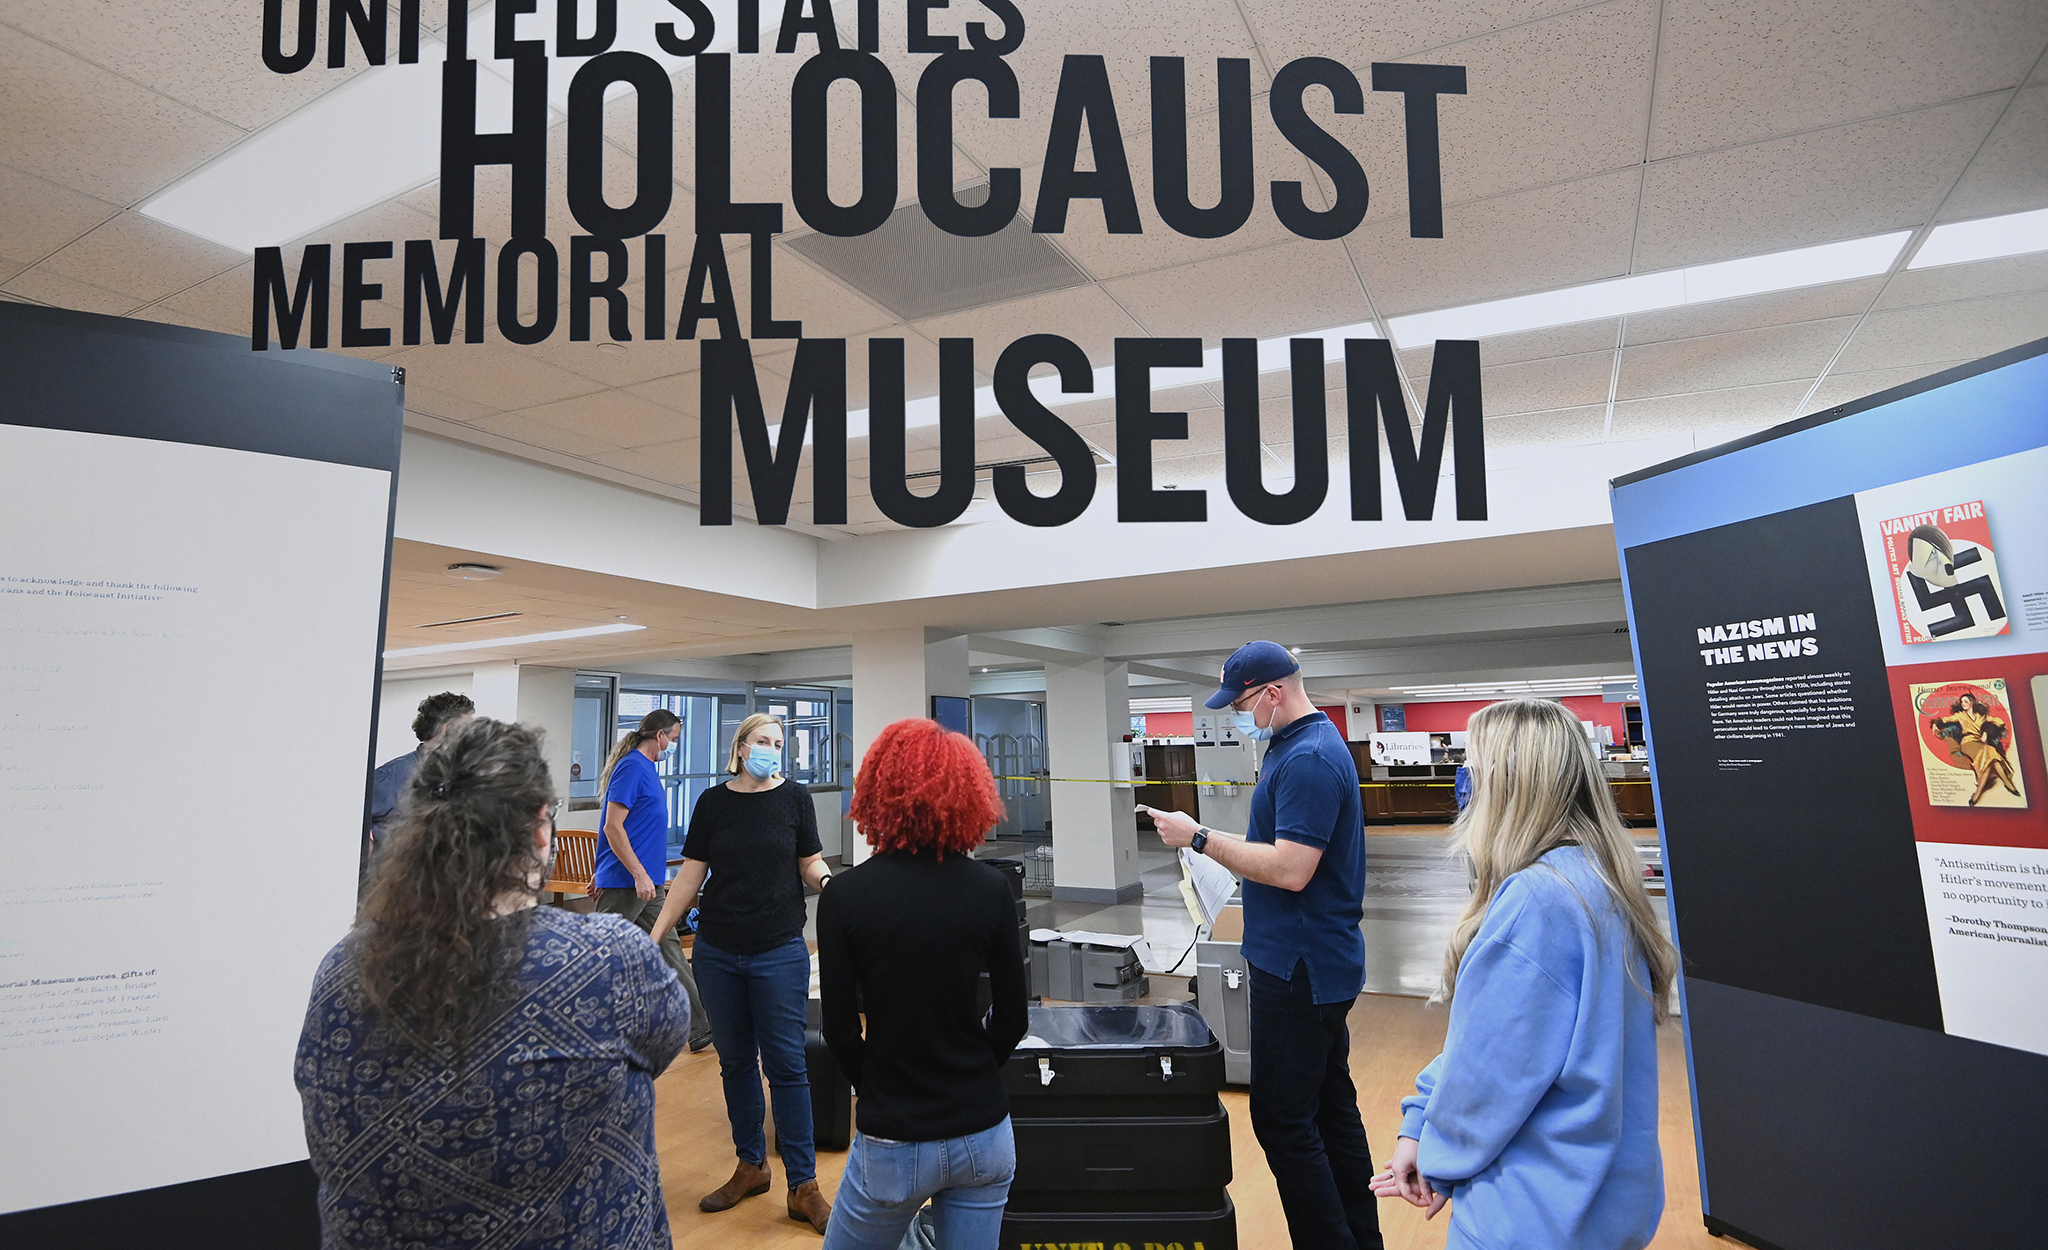 UM library staff members install the United States Holocaust Memorial Museum exhibit in the J.D. Williams Library. The display is open through HJan. 14.